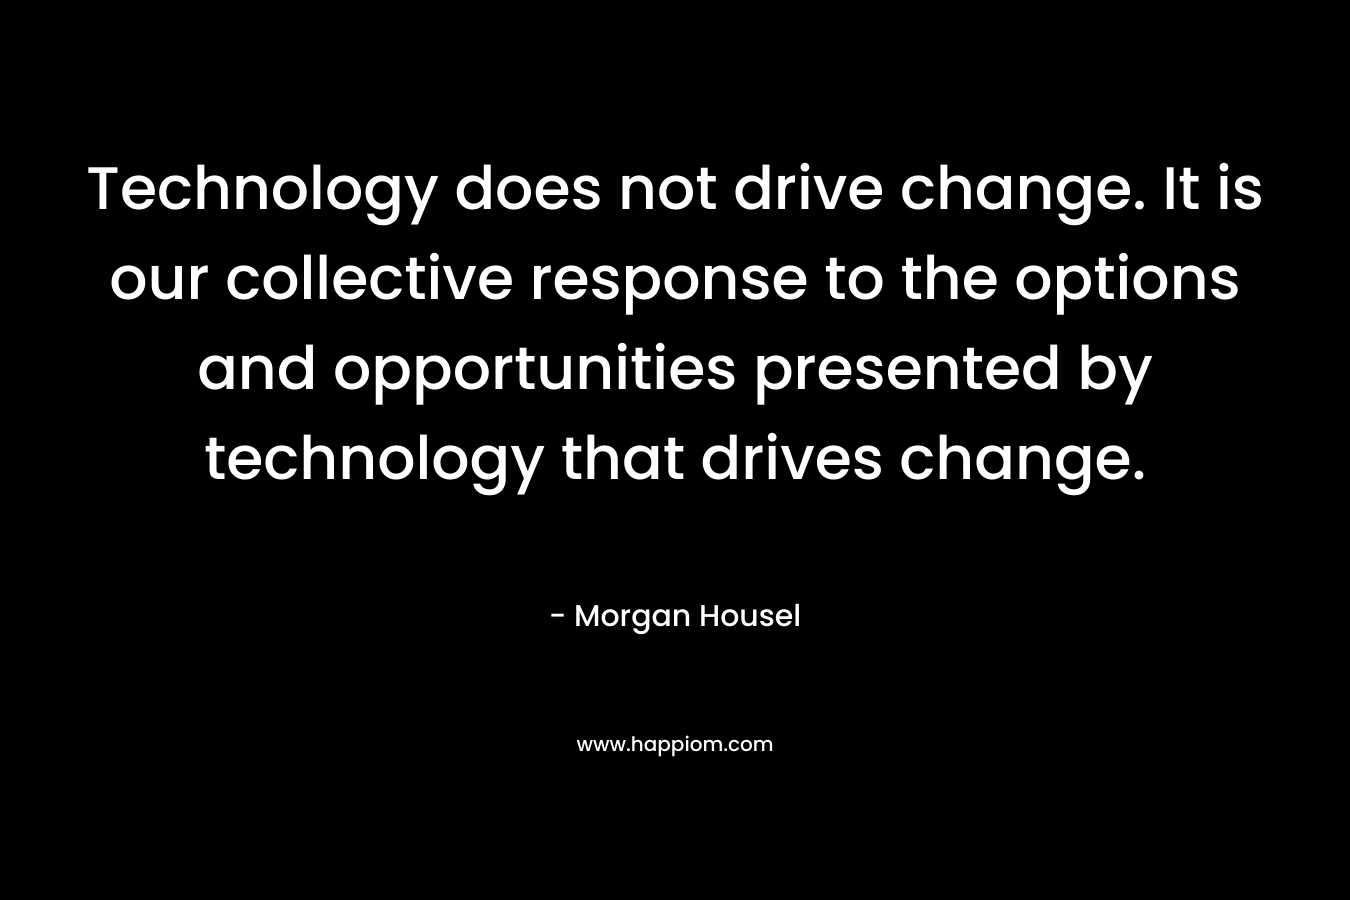 Technology does not drive change. It is our collective response to the options and opportunities presented by technology that drives change.